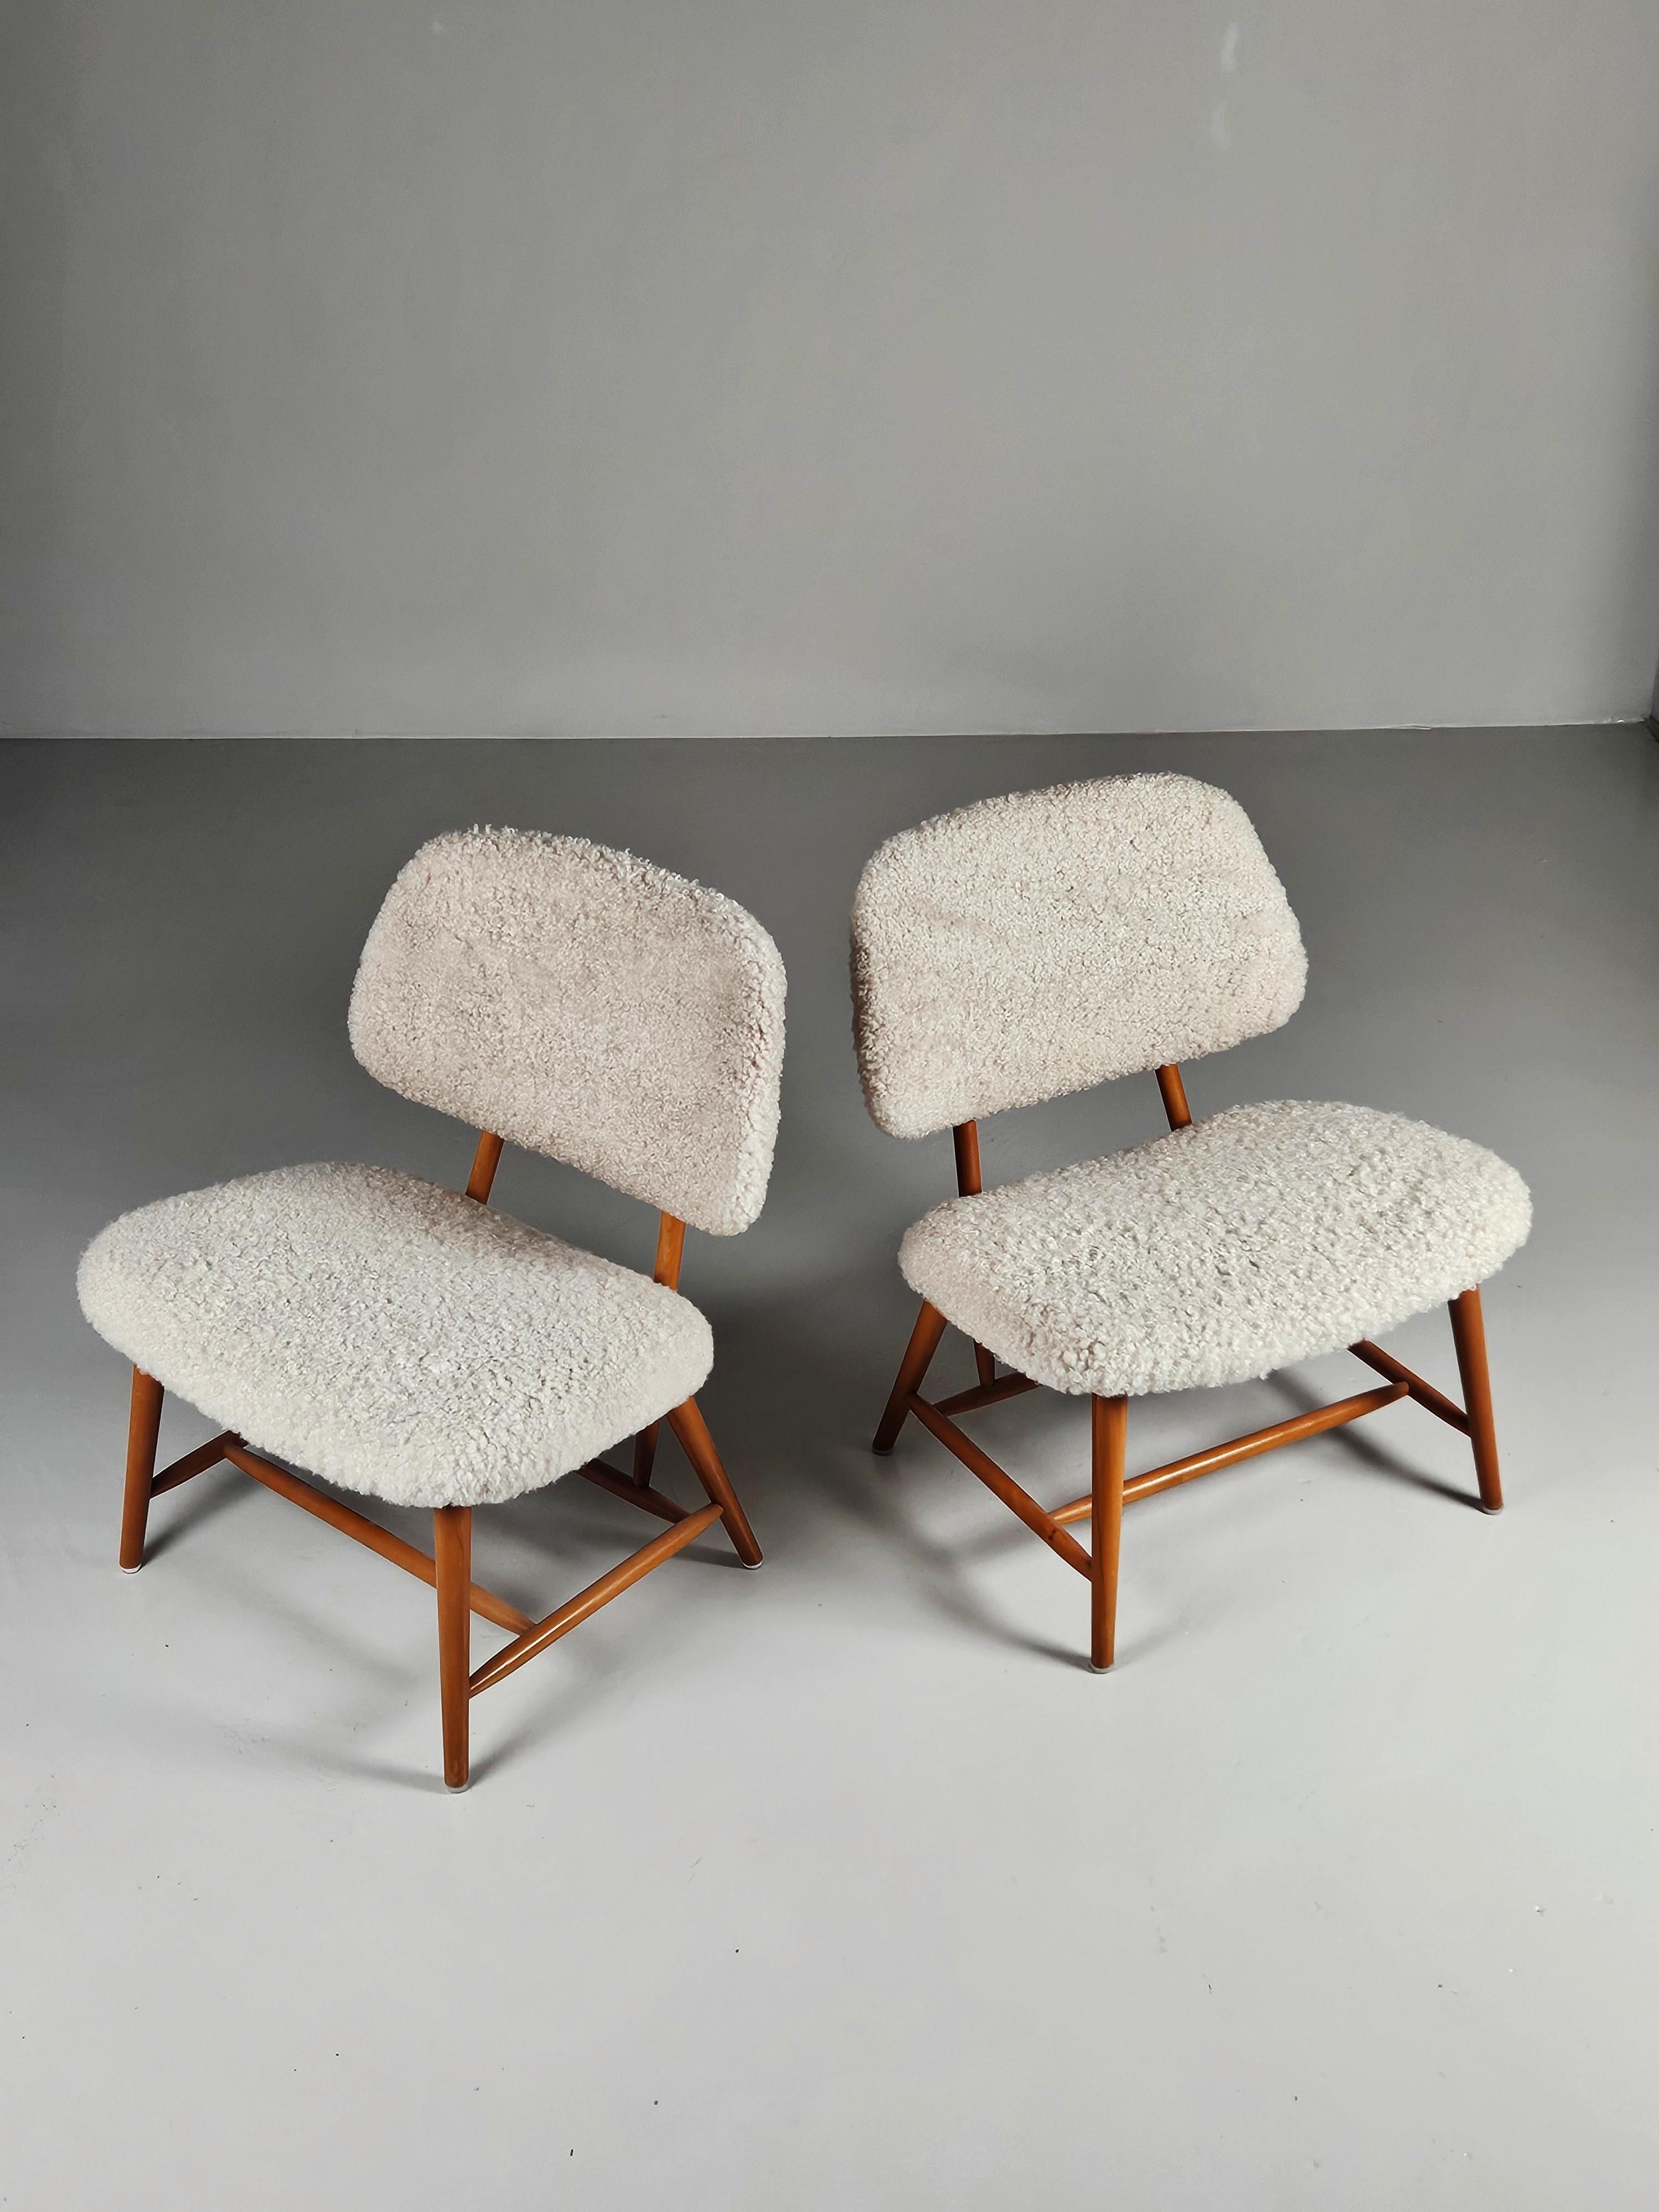 Pair of easy chairs designed by Alf Svensson for Bra Bohag, Ljungs Industrier, Sweden, during the 1950s. 

Model is called 'Teve'.

Body in beach and upholstered in white sheepskin. 